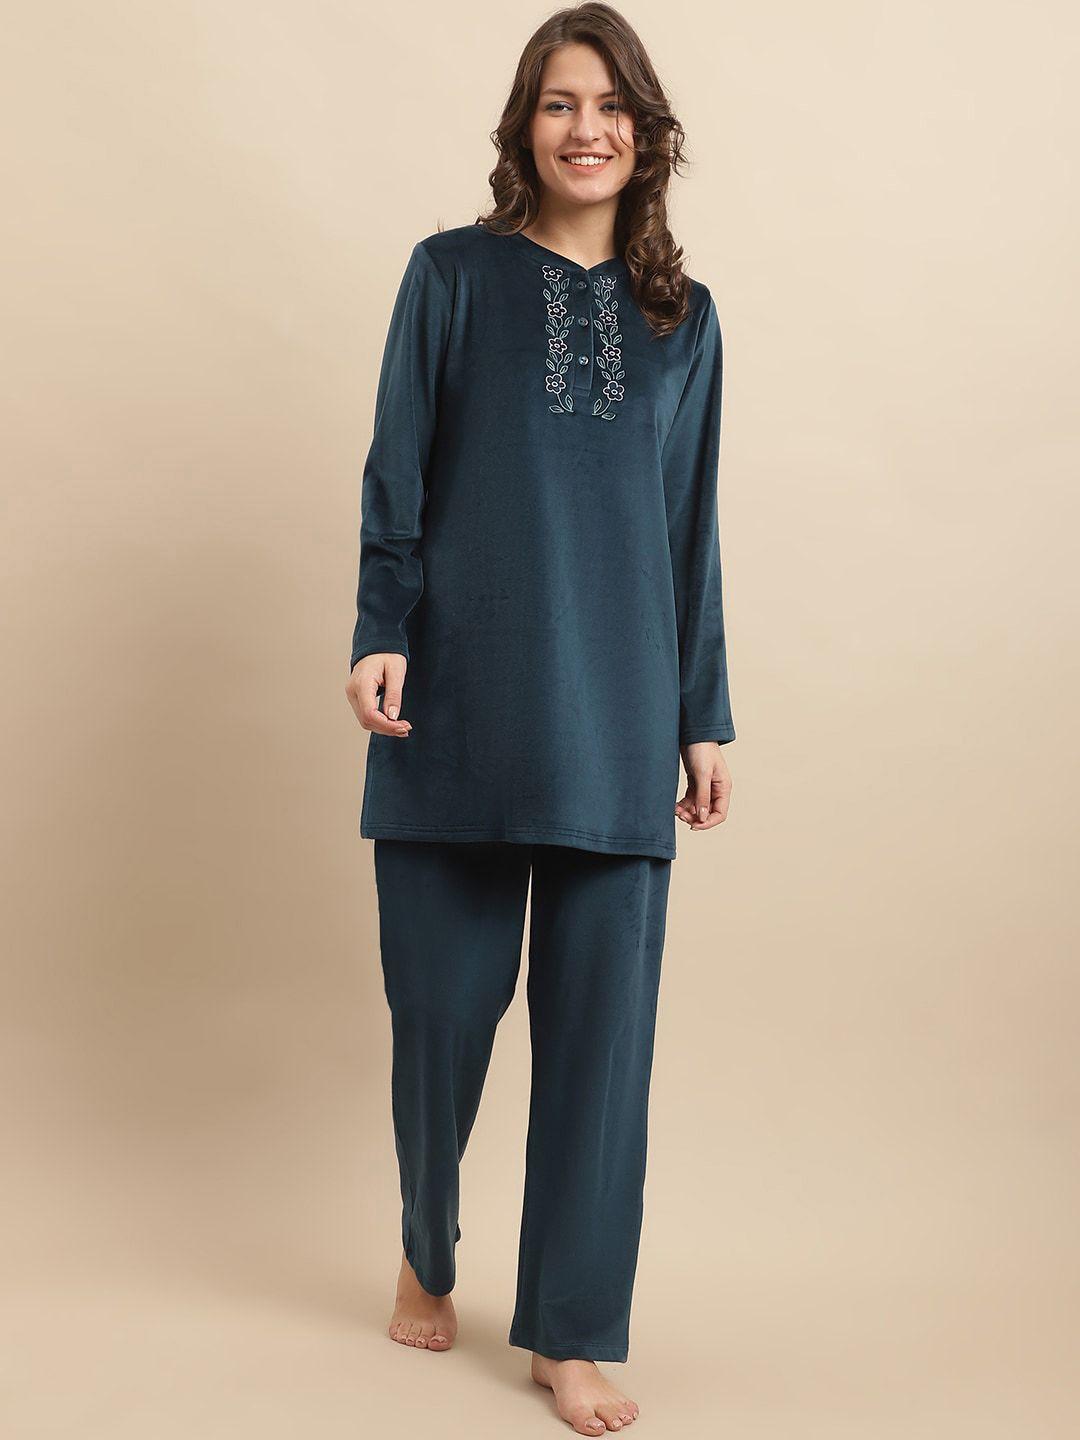 kanvin floral embroidered night suit